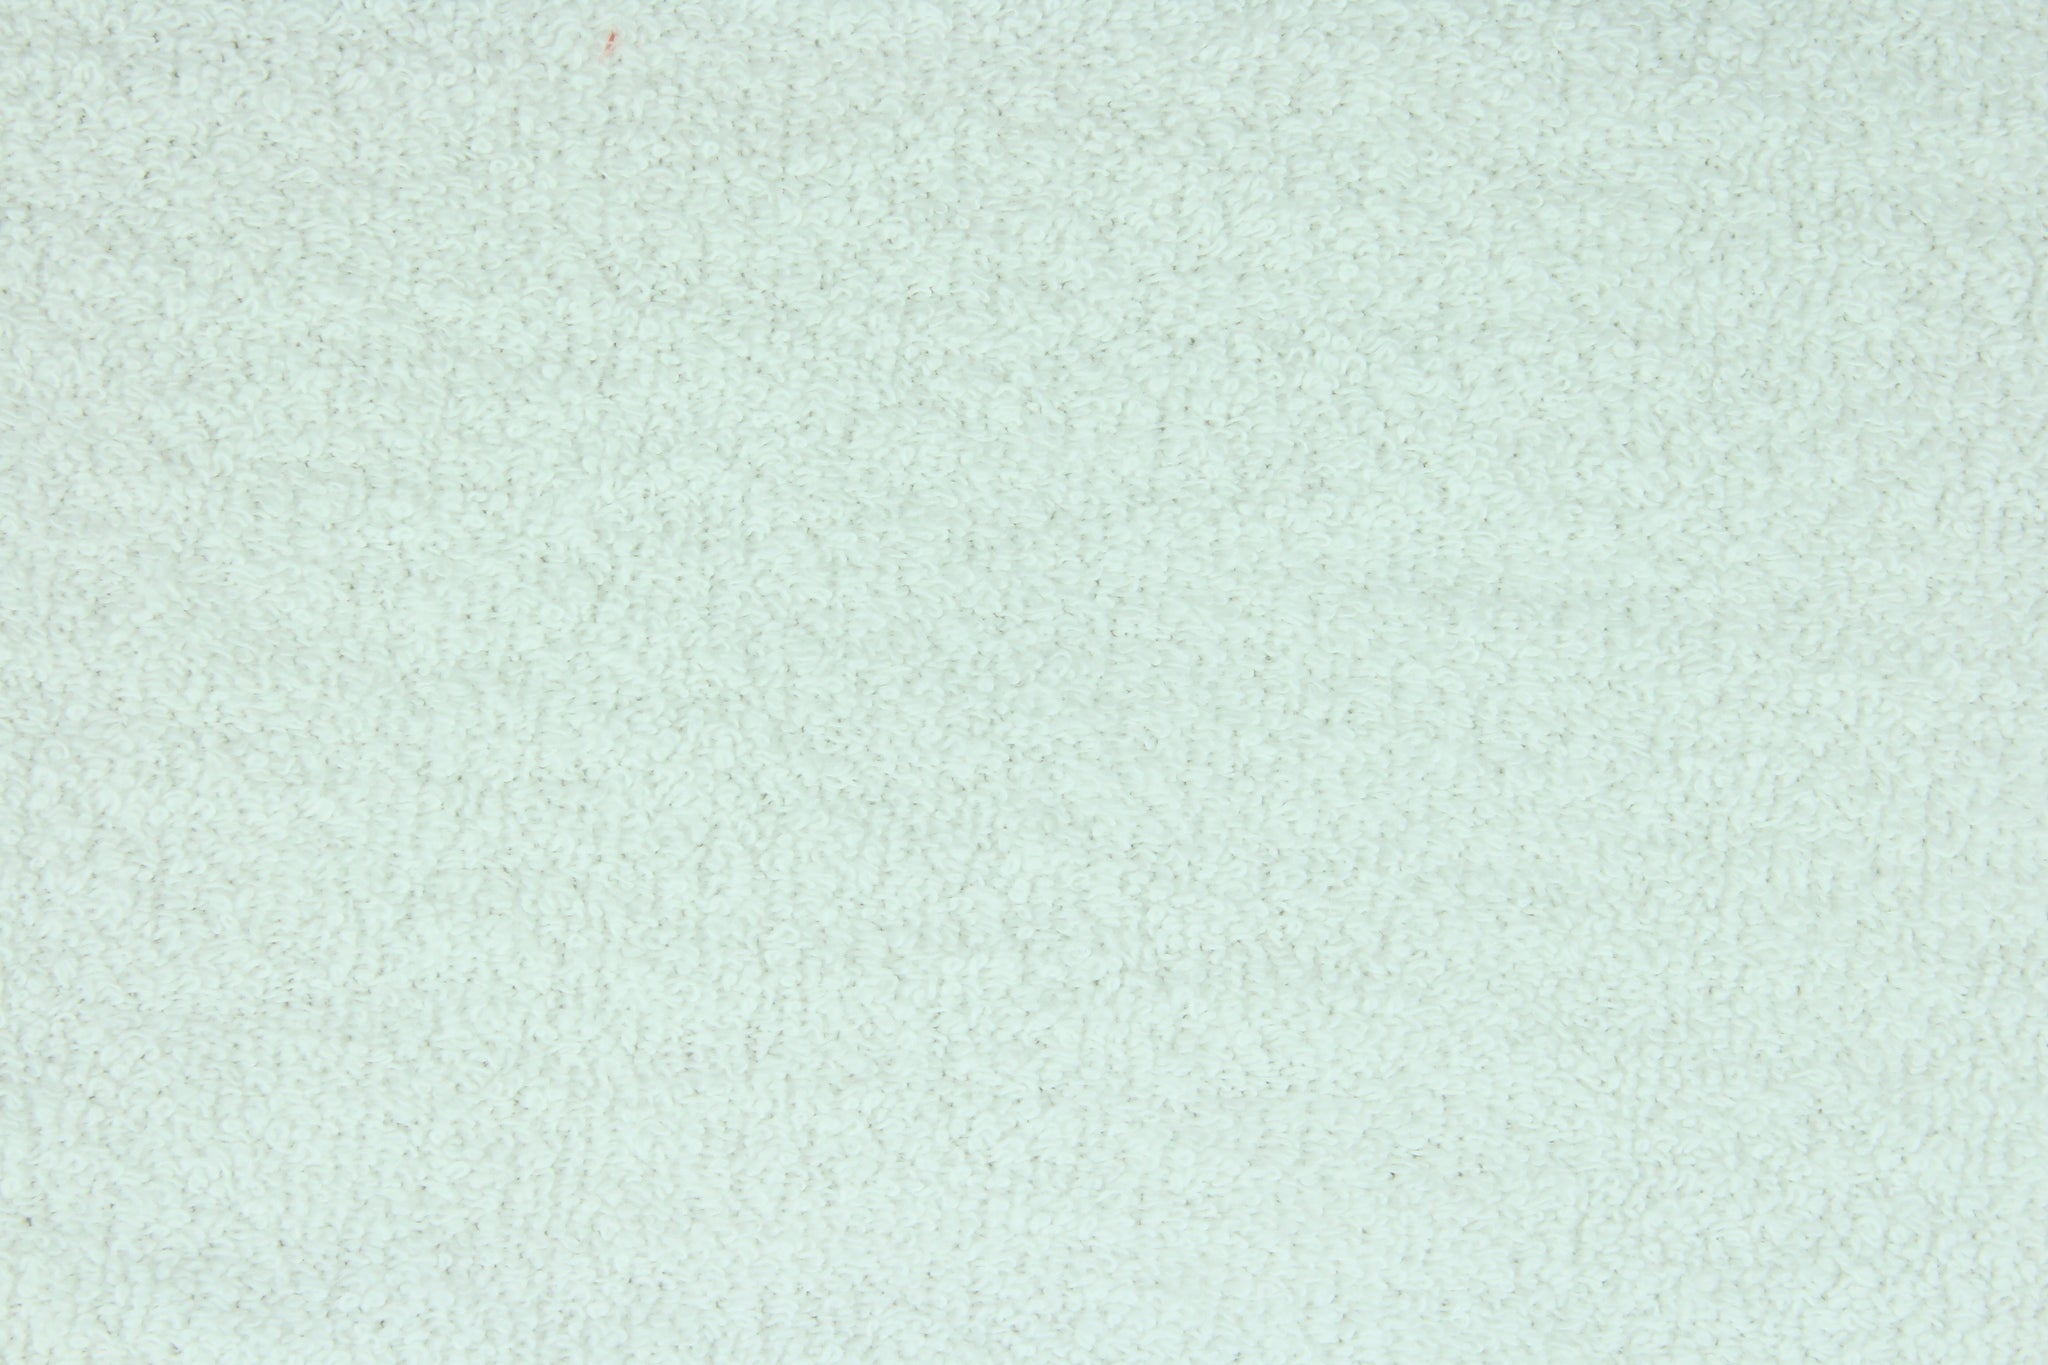 Terry Cloth Fabric In A Solid White